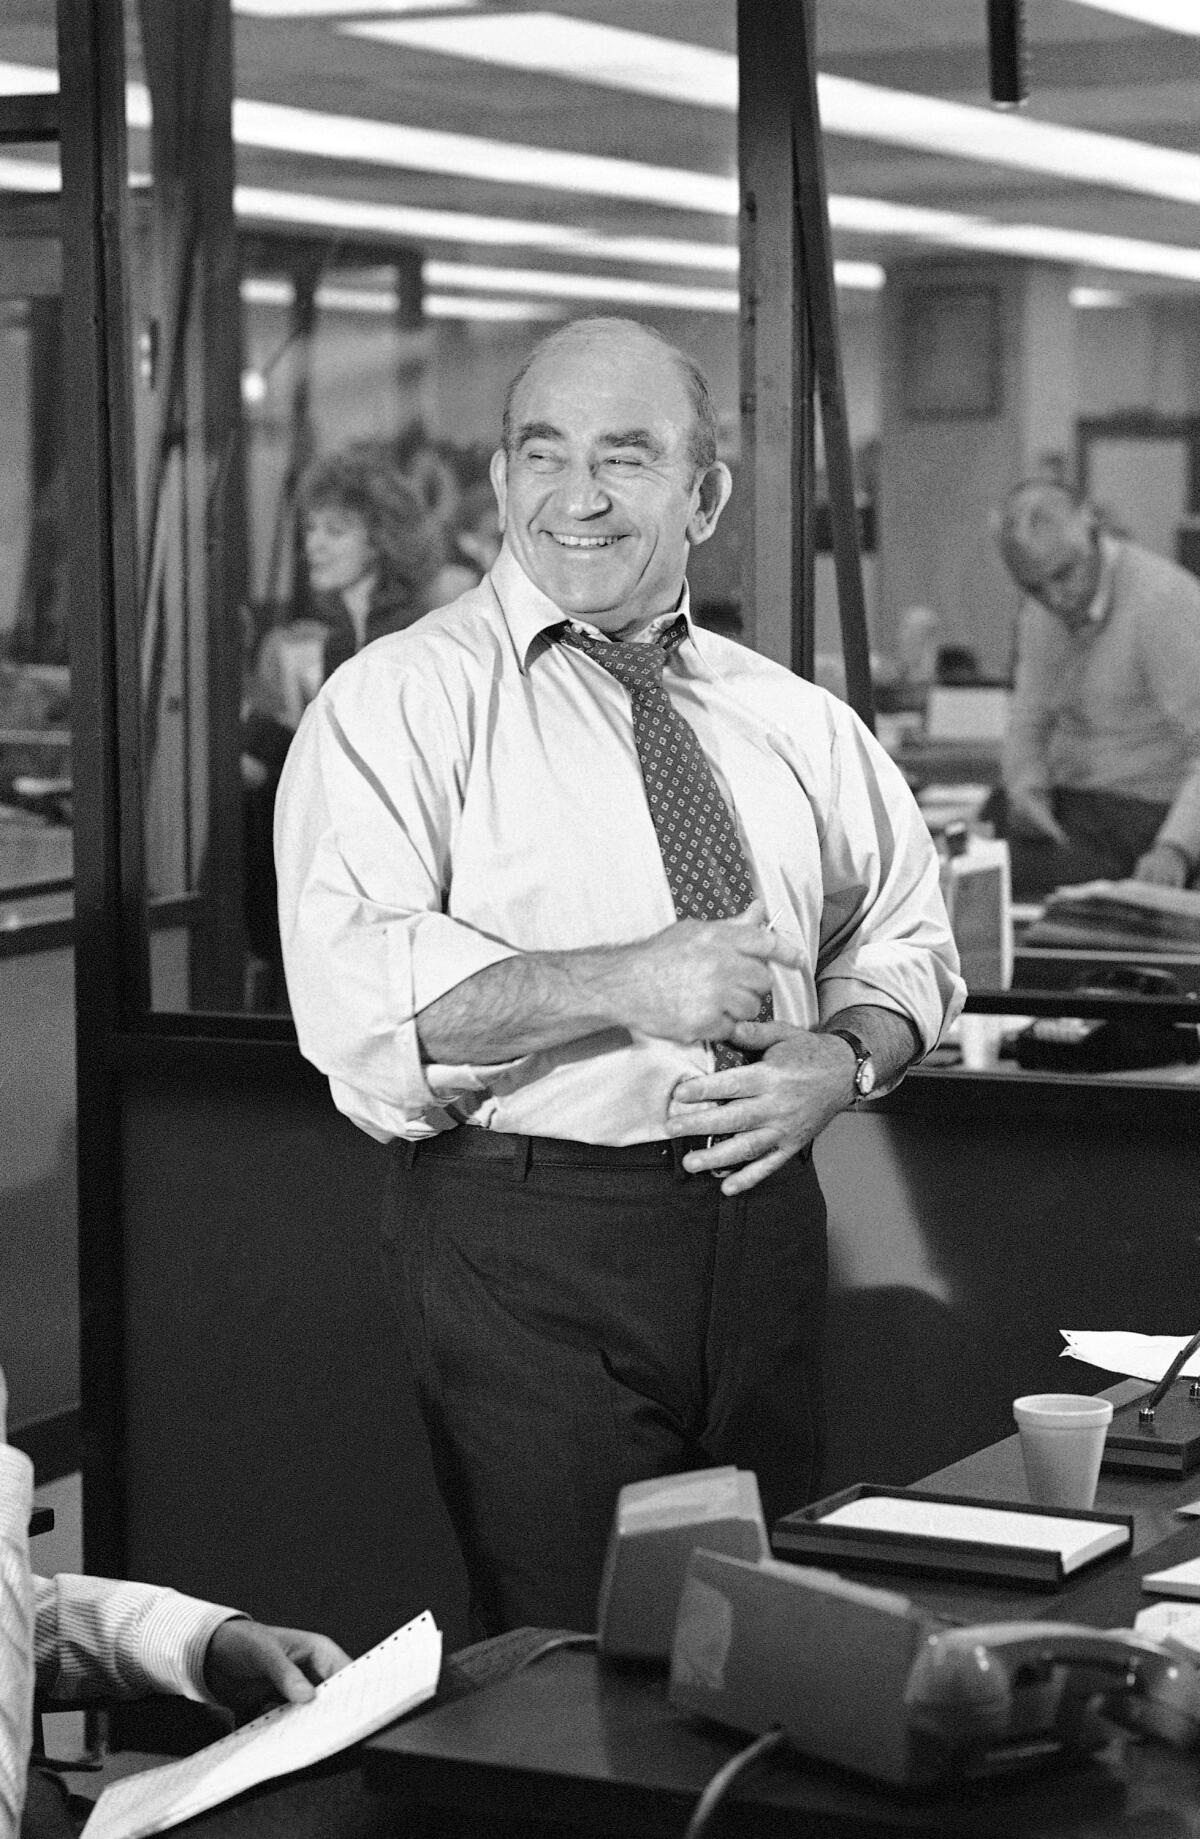 A man in a tie stands in a newsroom office